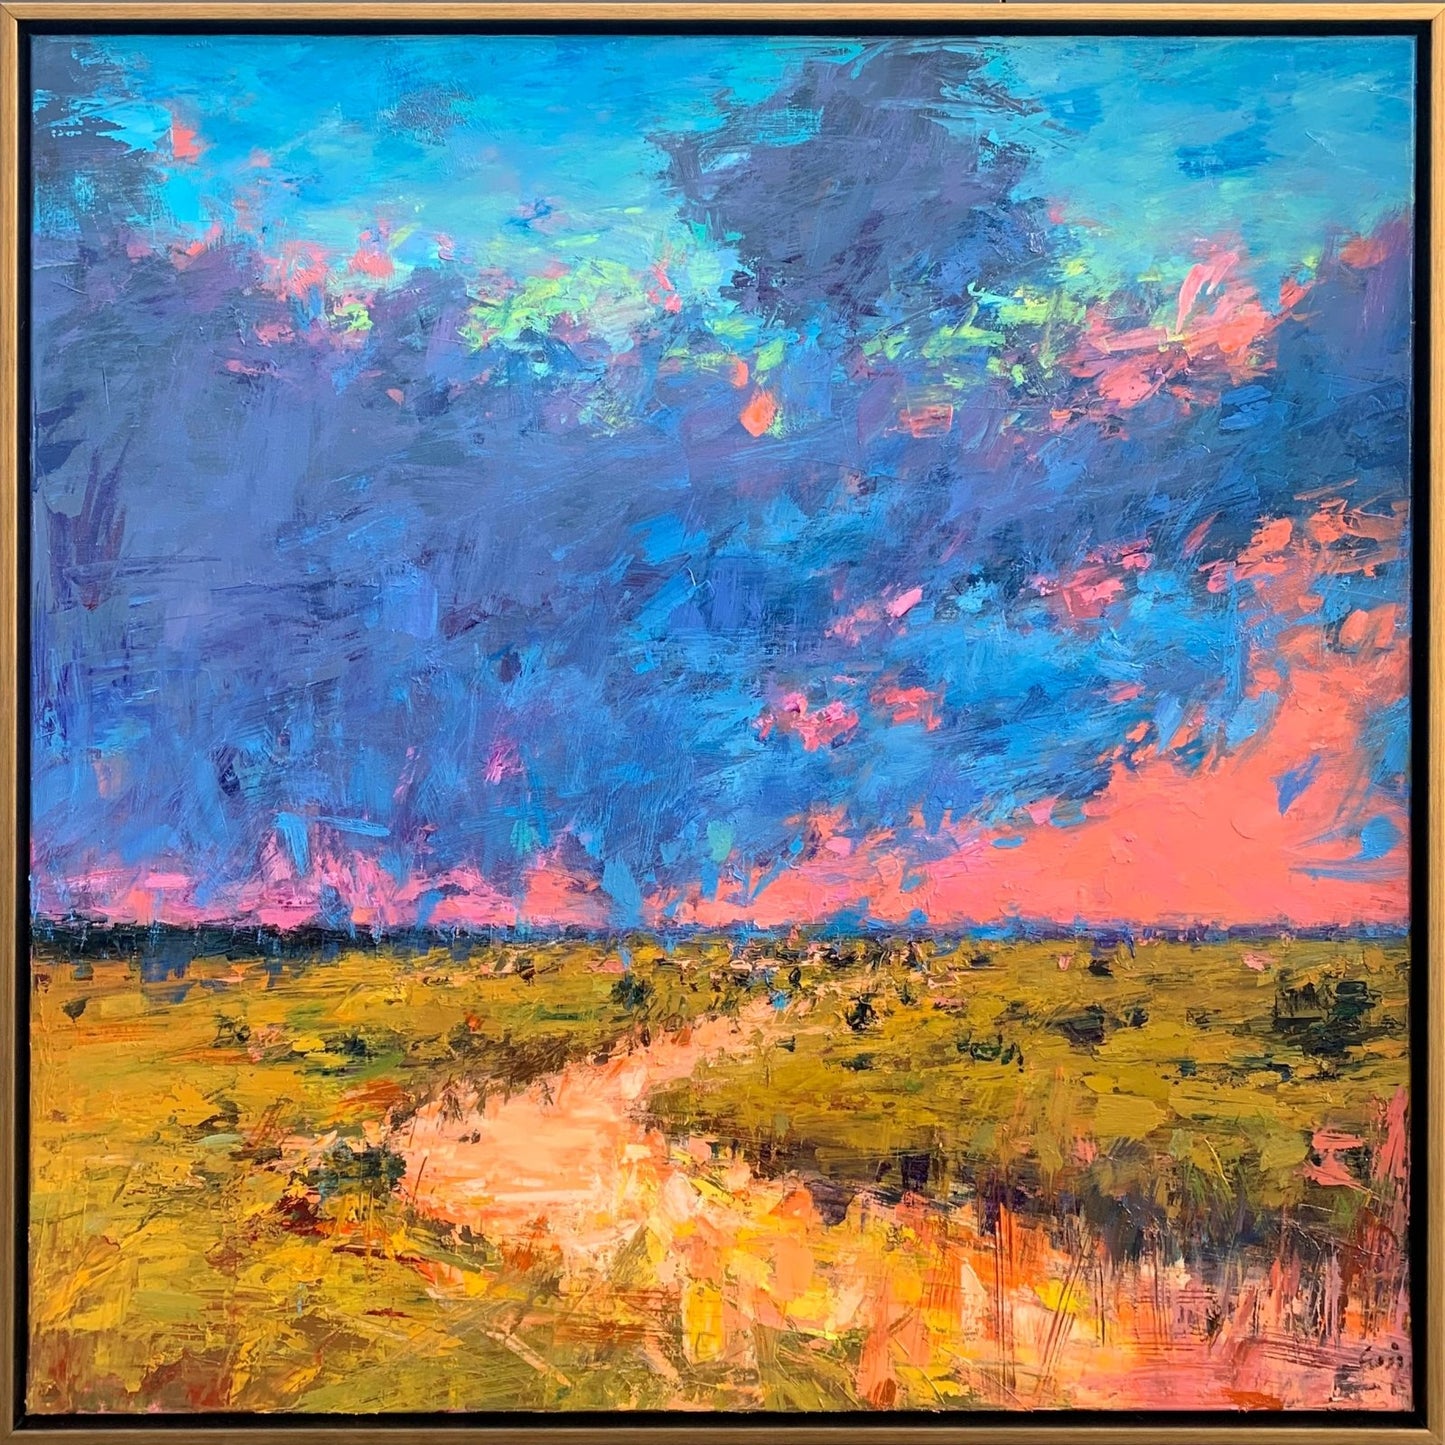 Dusk in Marshland by Ning Lee at LePrince Galleries